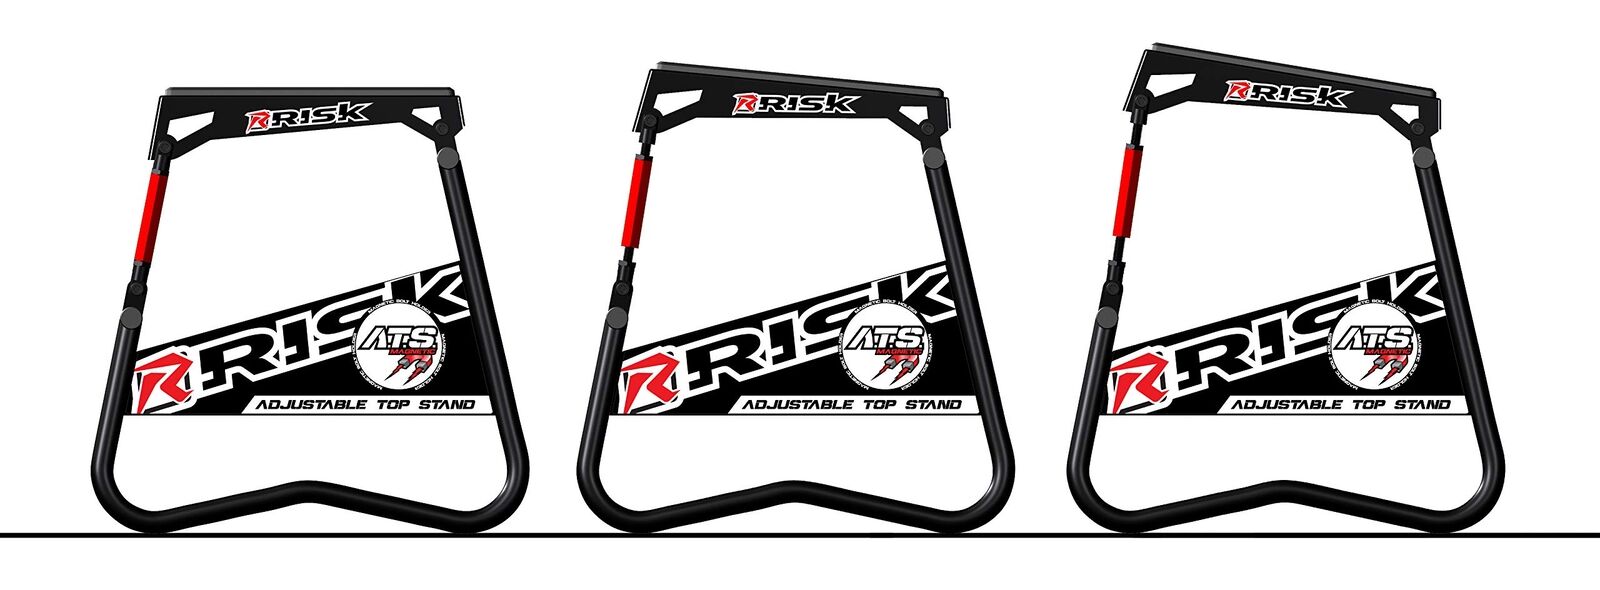 Risk Racing 00 Adjustable Top Stand With Magnetic Side Plate 381